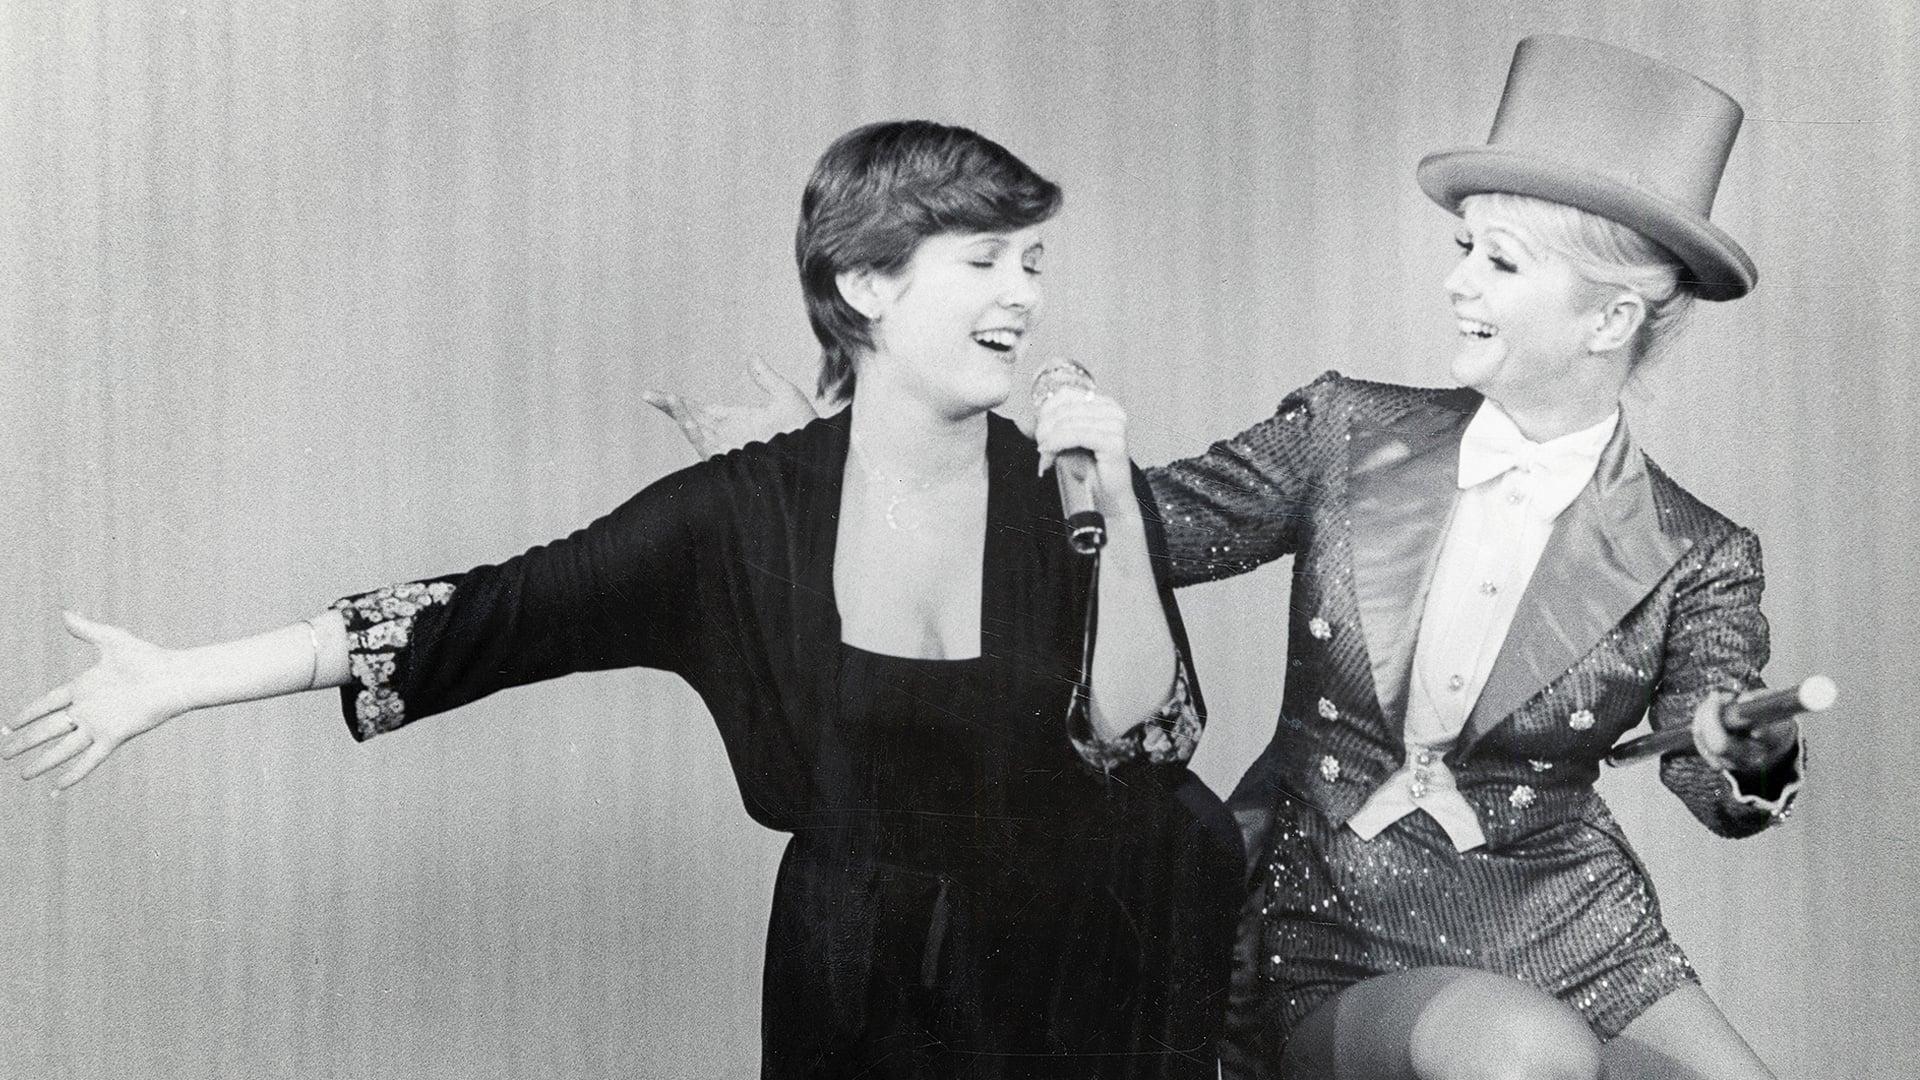 Bright Lights: Starring Carrie Fisher and Debbie Reynolds backdrop